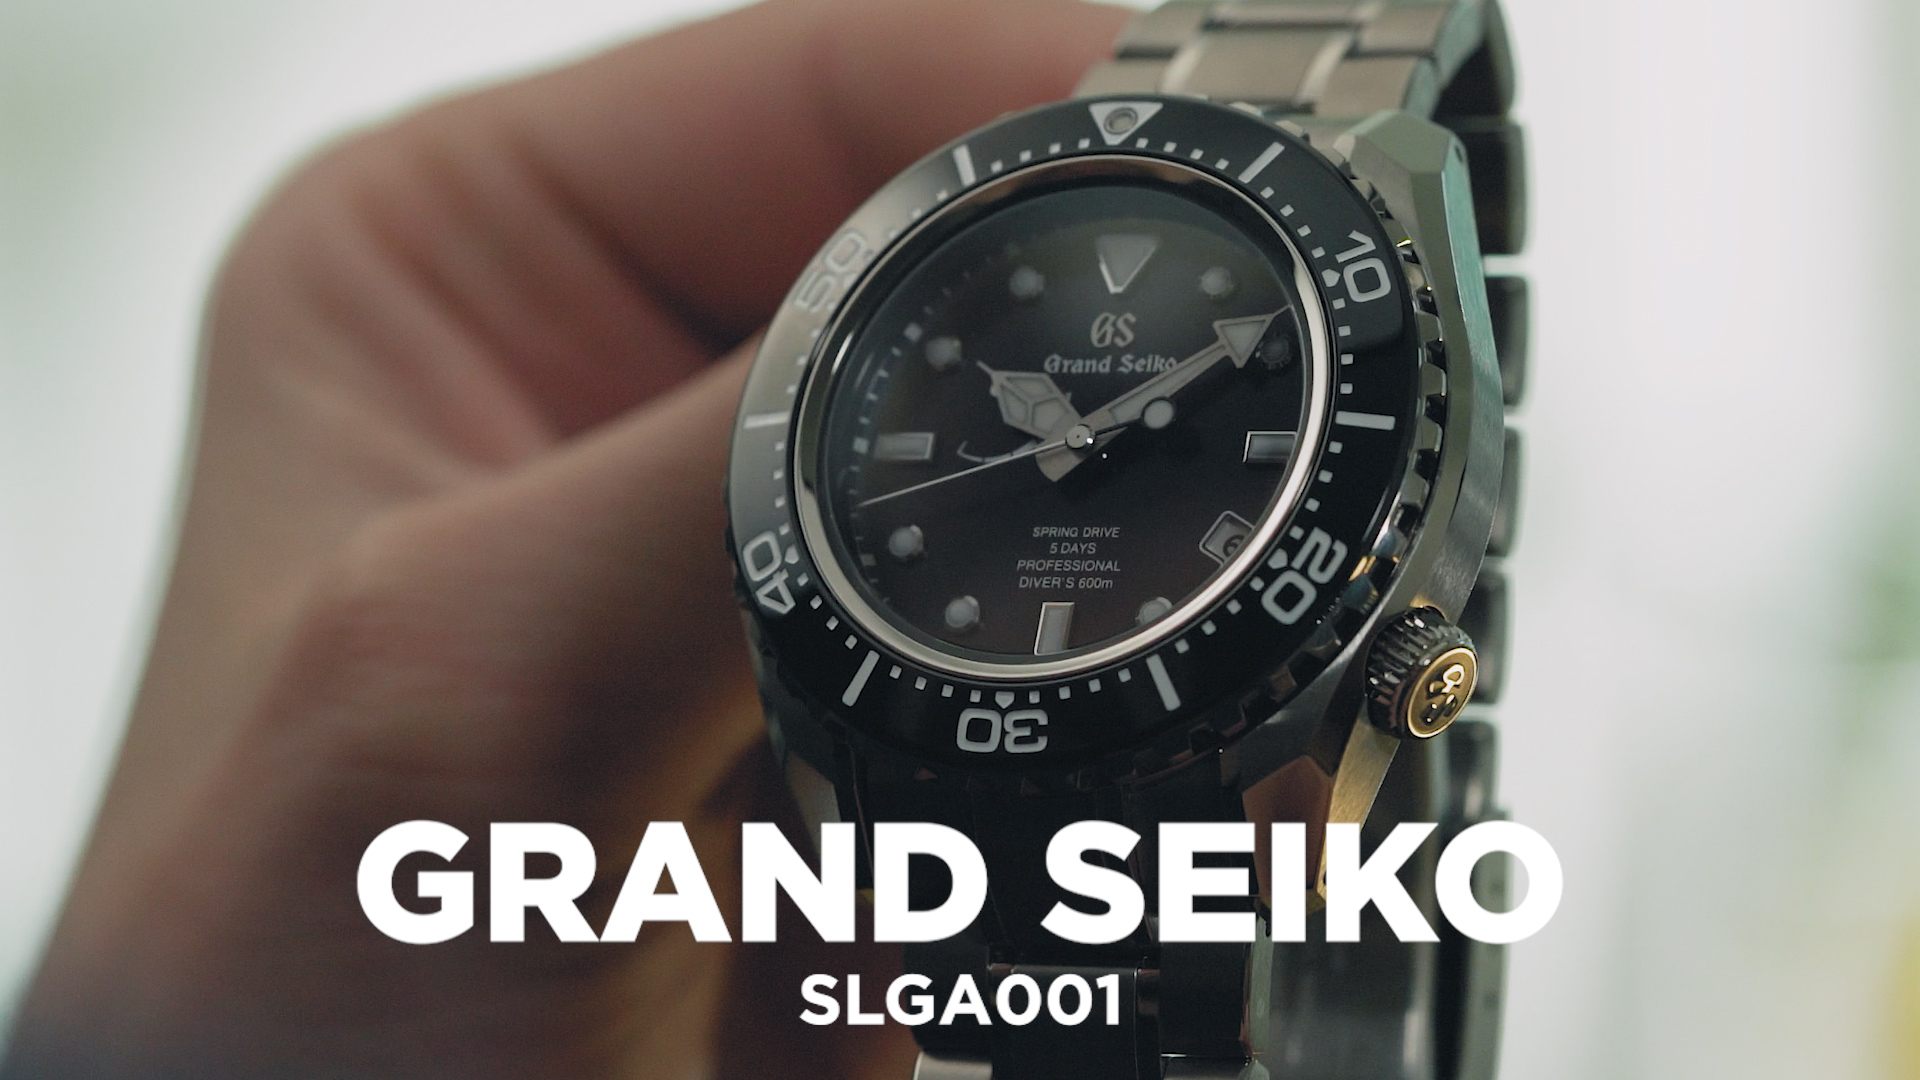 VIDEO: The Grand Seiko SLGA001 is big and brawny, but make no mistake, it  has brains too - Time and Tide Watches